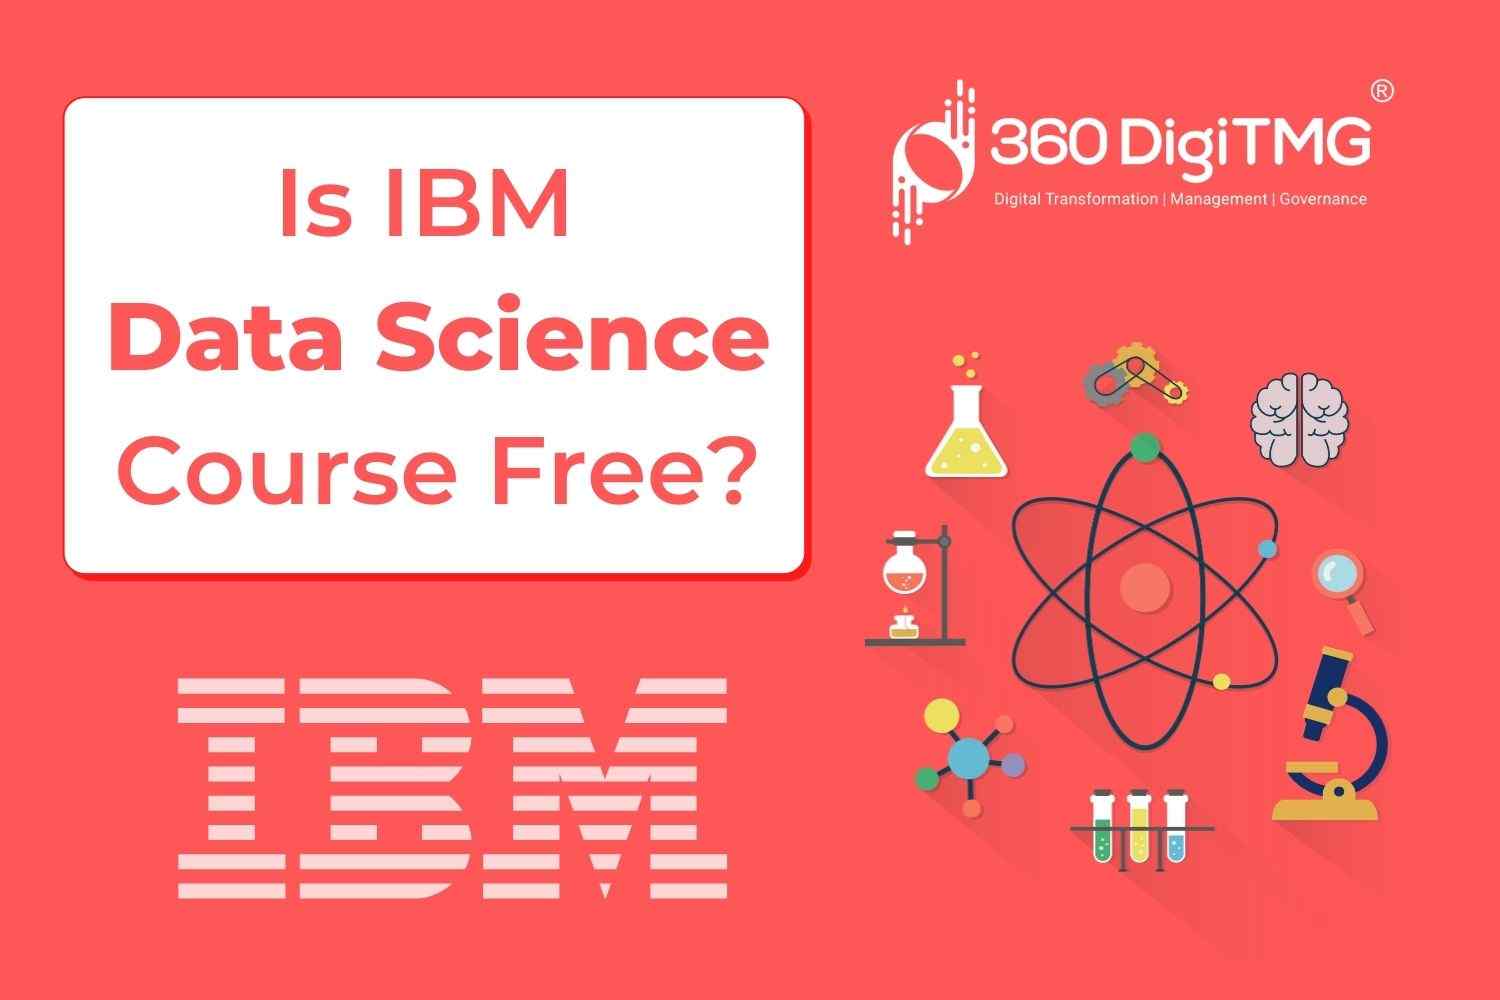 Is IBM Data Science Course Free?